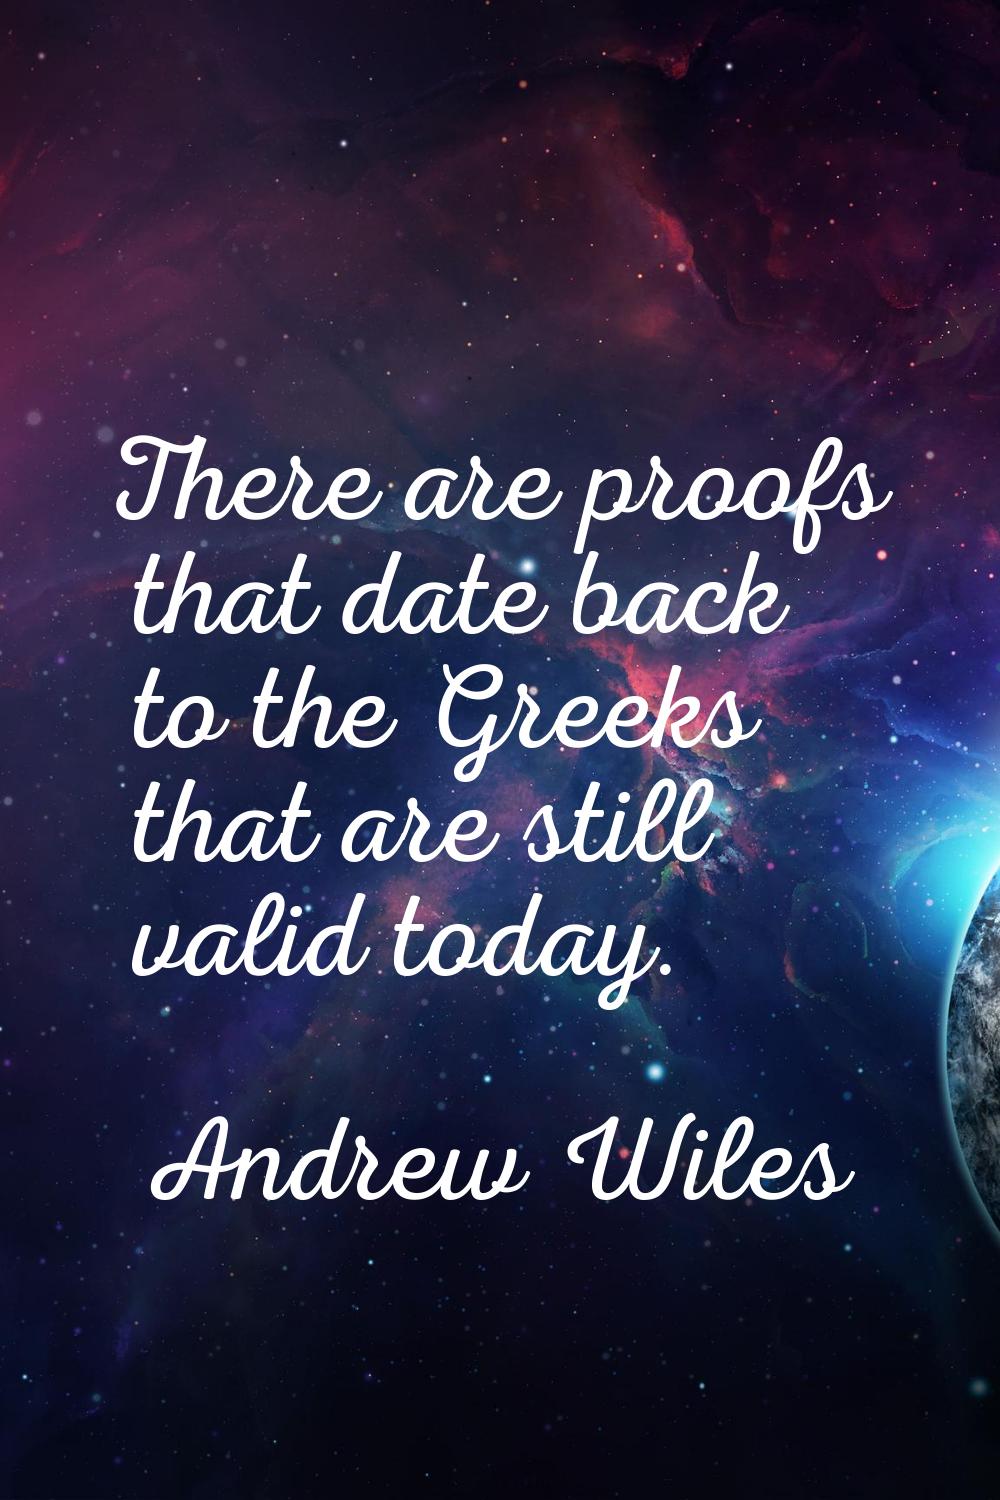 There are proofs that date back to the Greeks that are still valid today.